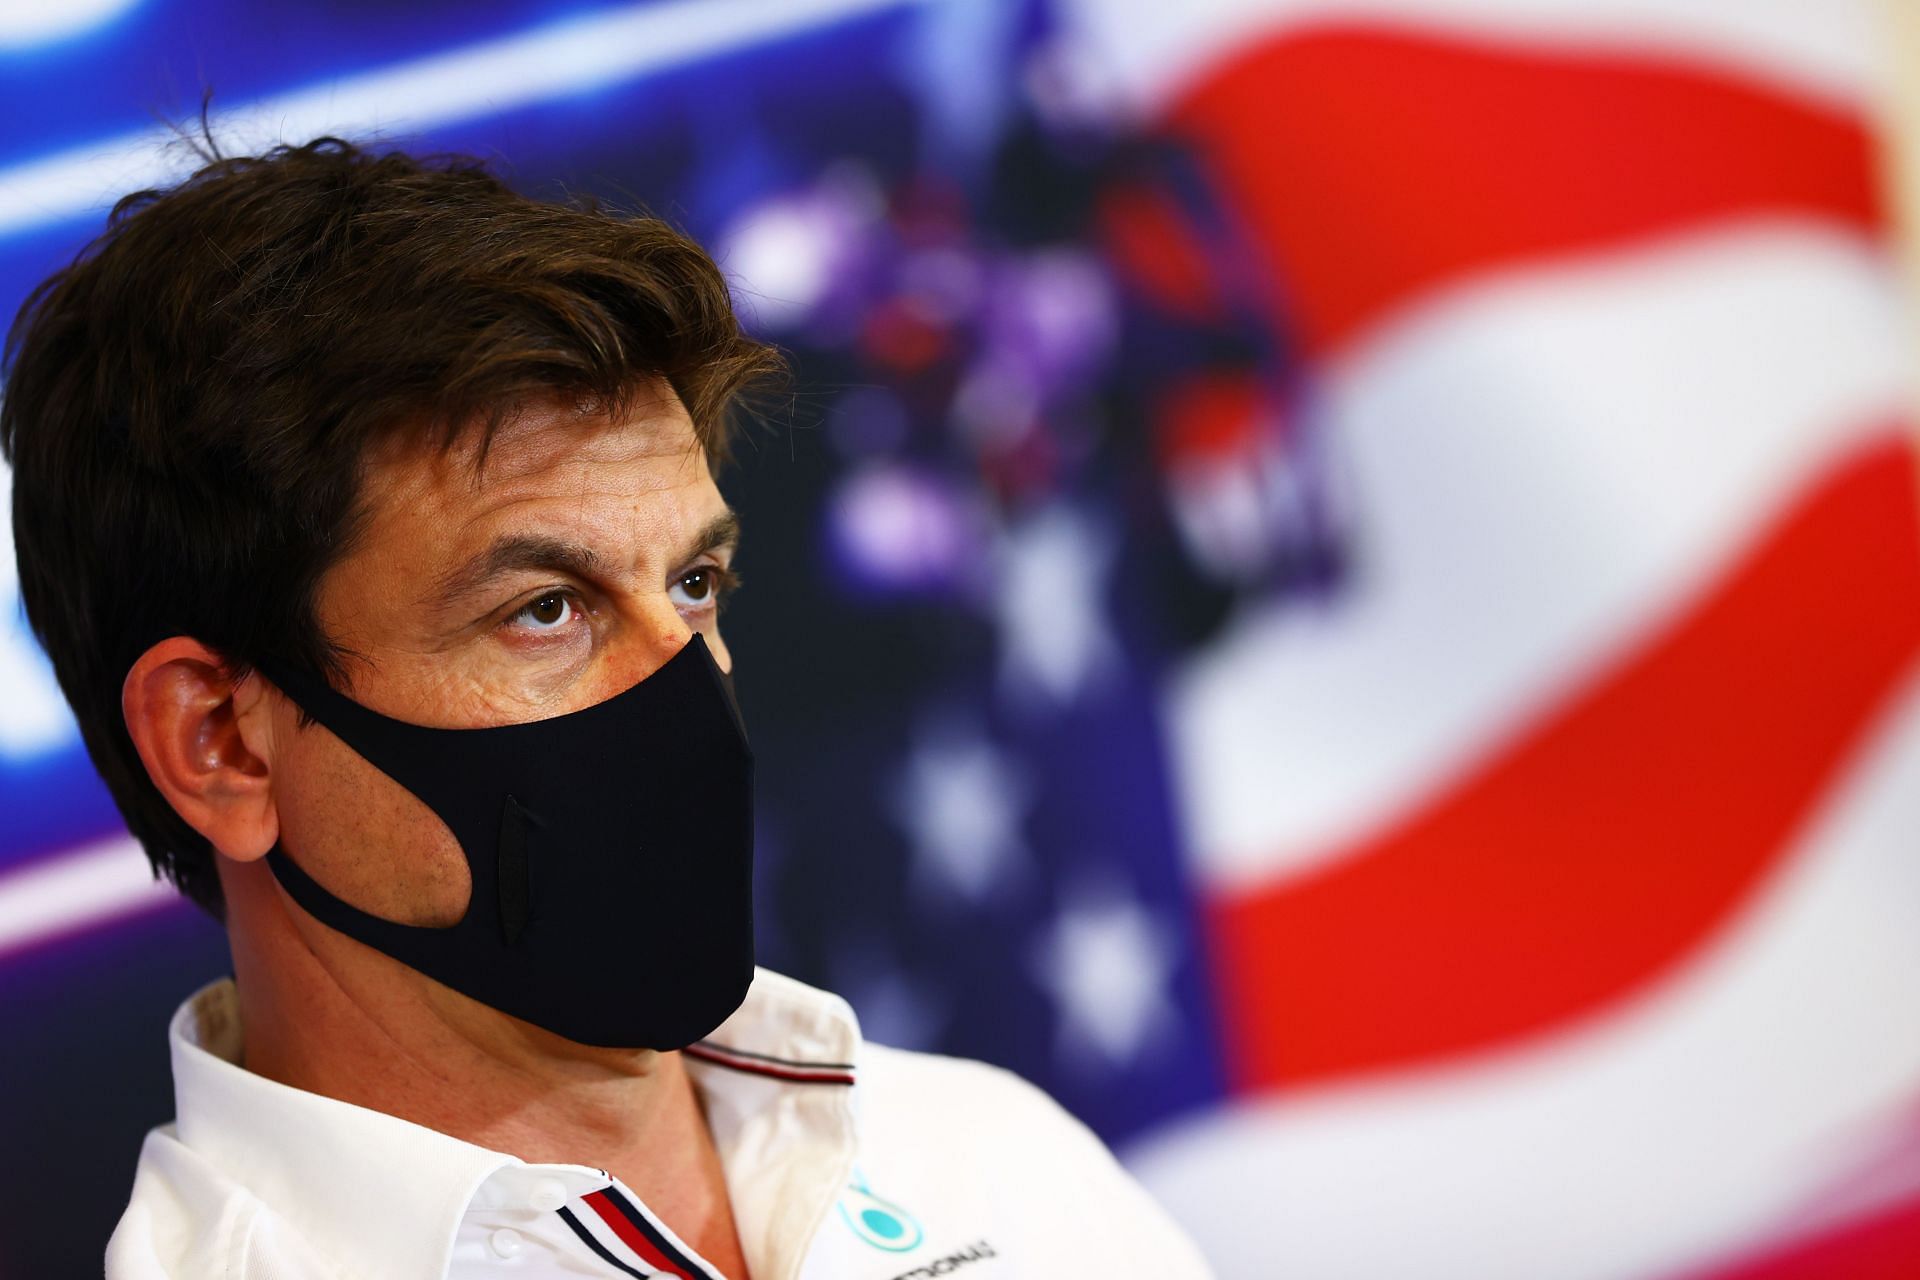 Mercedes Executive Director Toto Wolff in a press conference. (Photo by Dan Istitene/Getty Images)